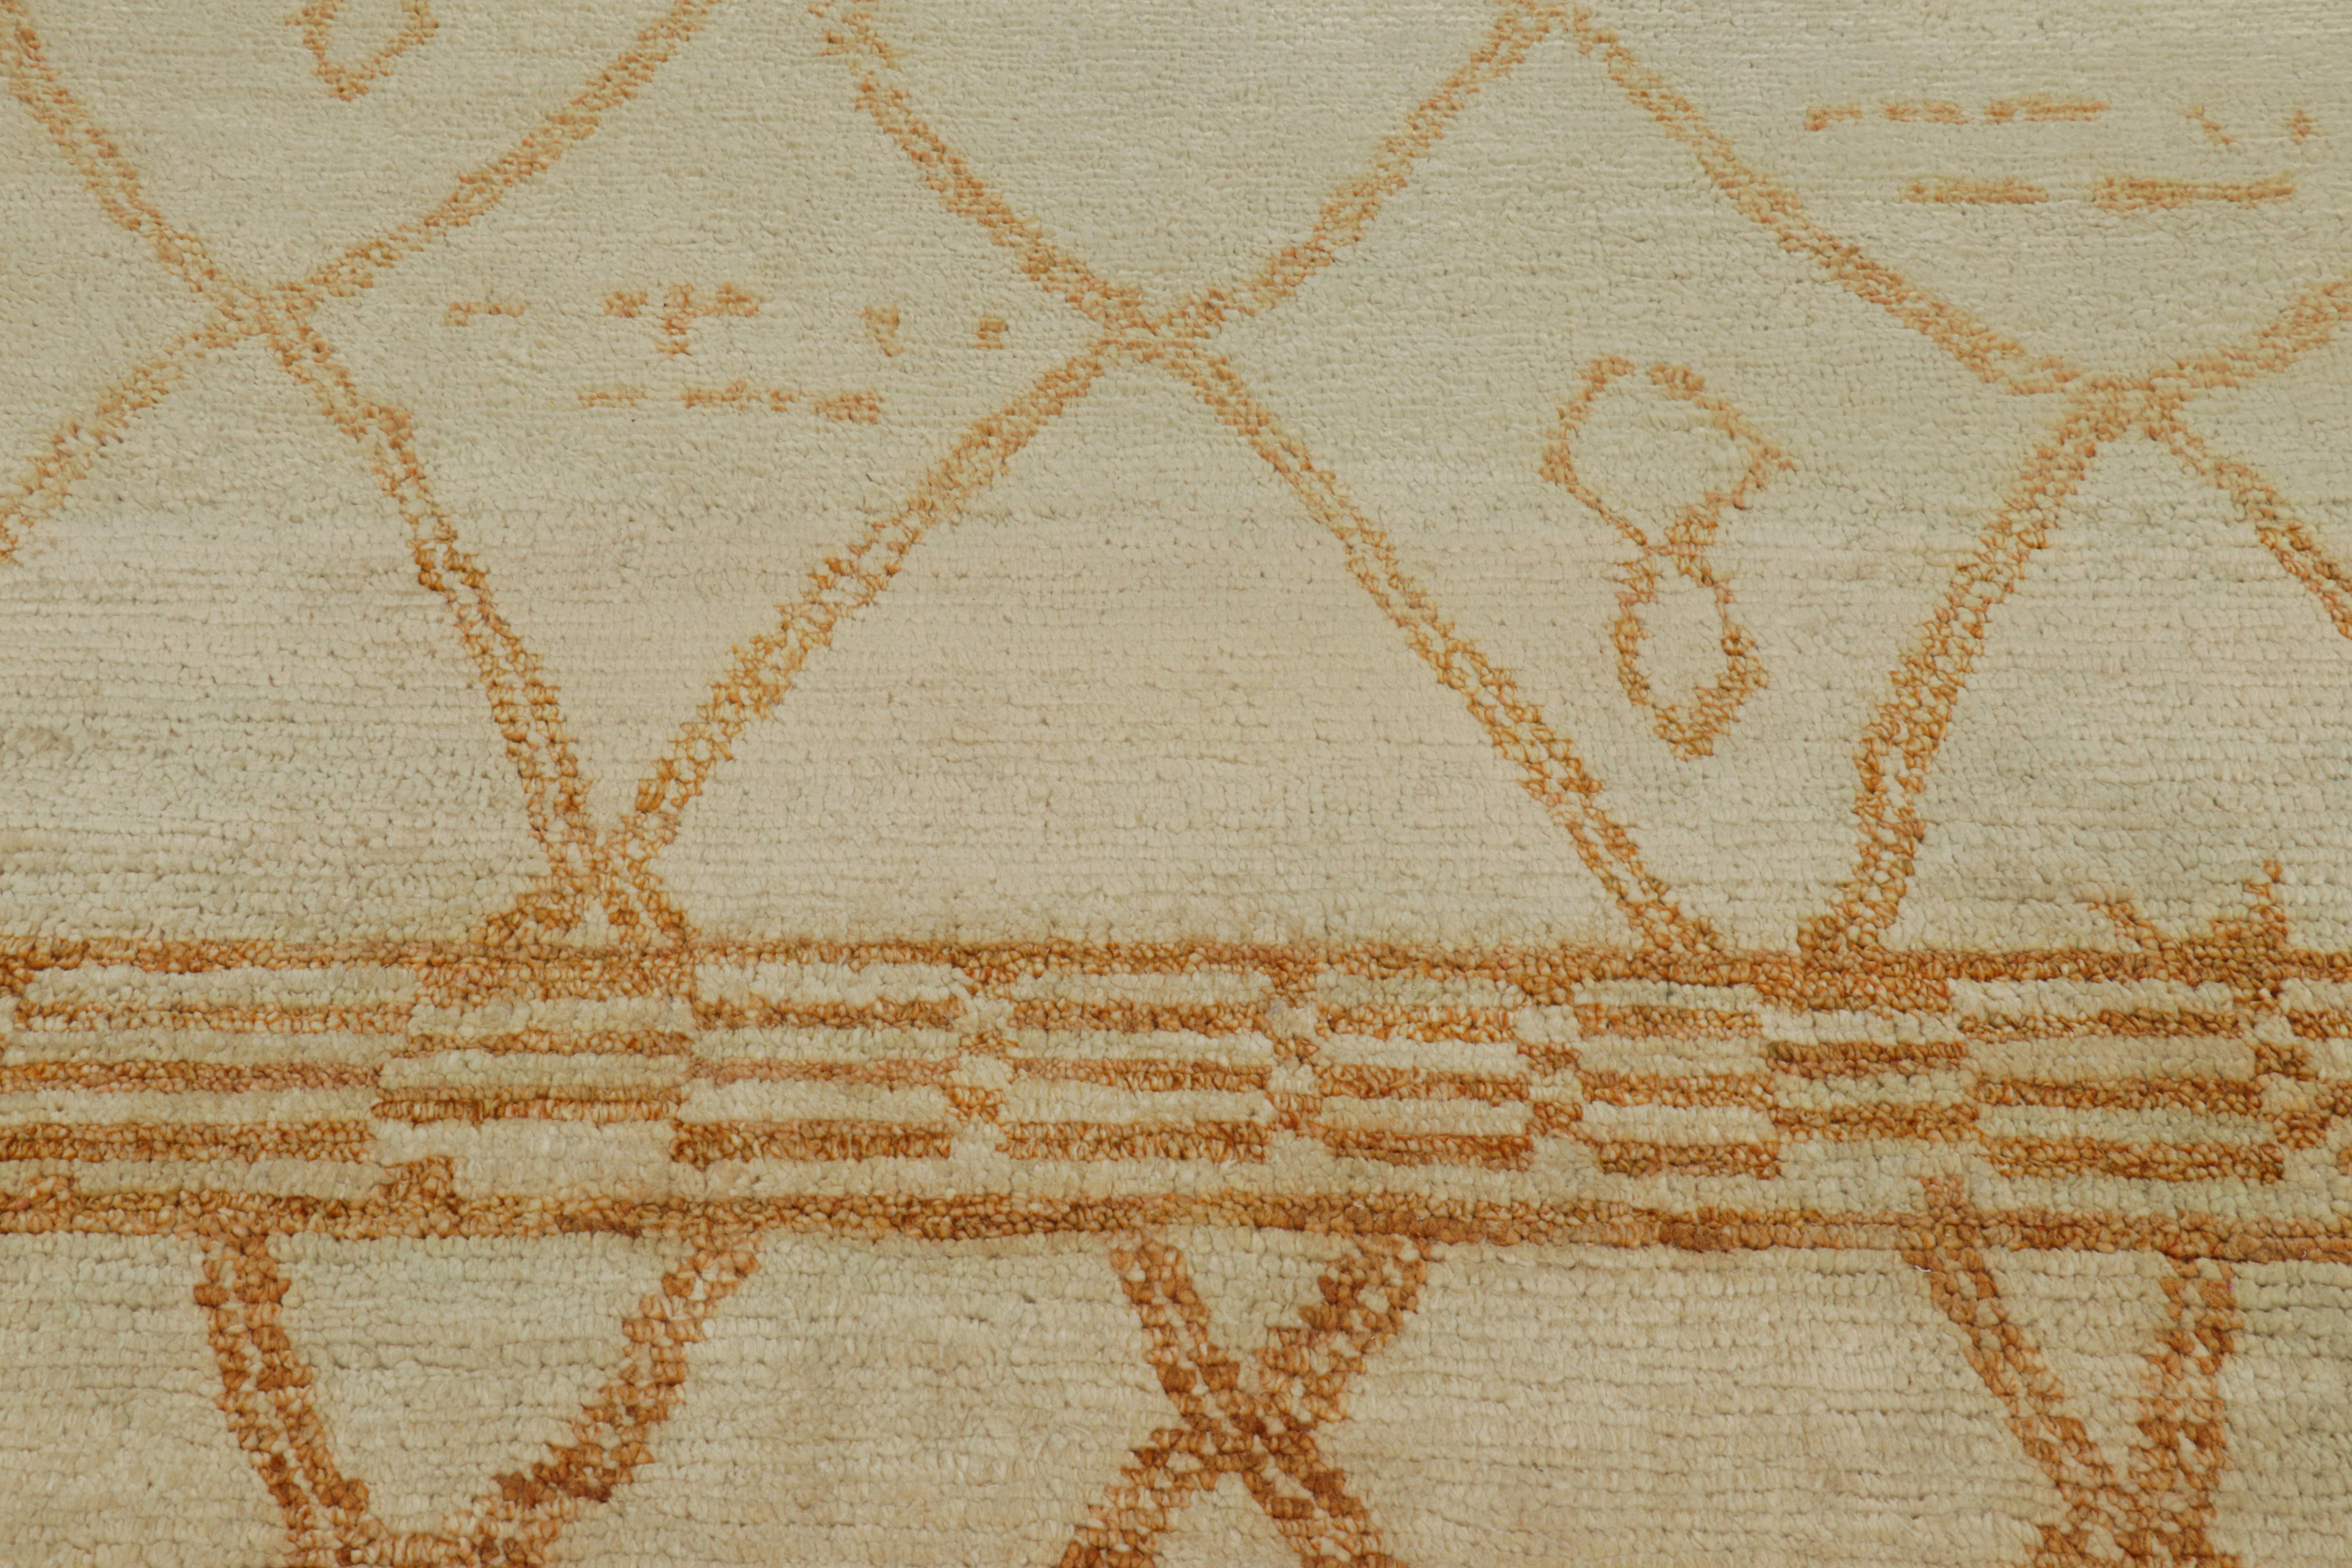 Hand-knotted in wool, this 6x9 contemporary Moroccan rug features a ribbed texture and geometric patterns inspired by the primitivist Berber weaving traditions.

On the Design: 

A field of cream and beige tones underscores geometric patterns in